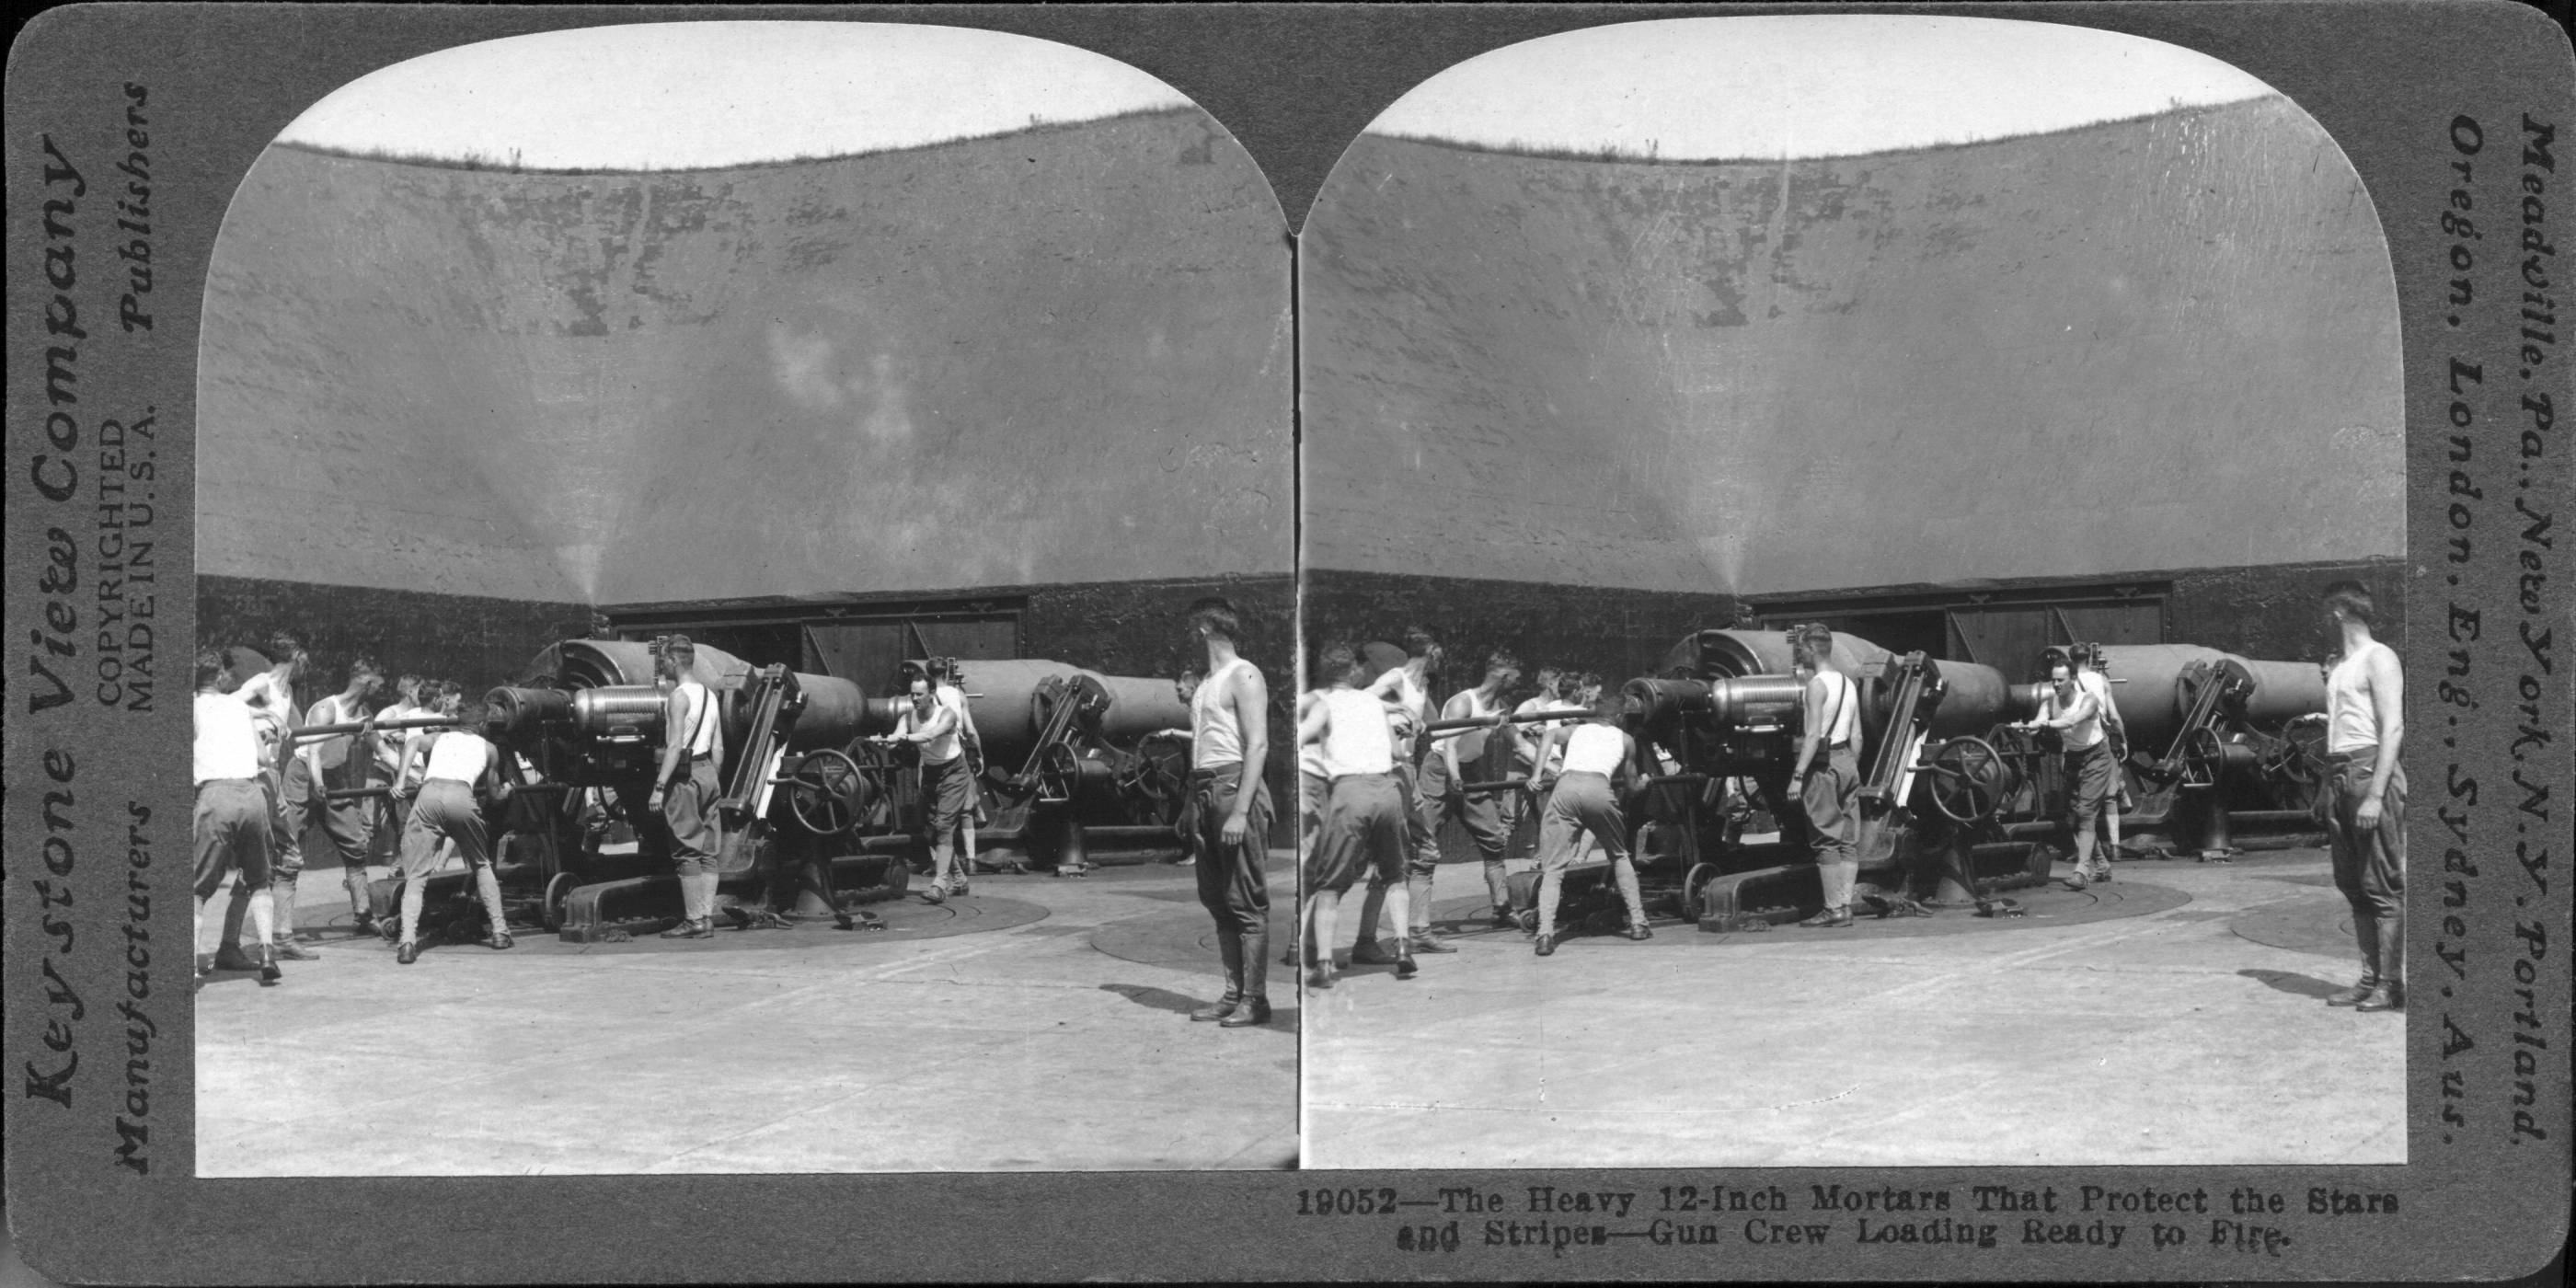 The Heavy 12-Inch Mortars That Protect the Stars and Stripes--Gun Crew Loading Ready to Fire